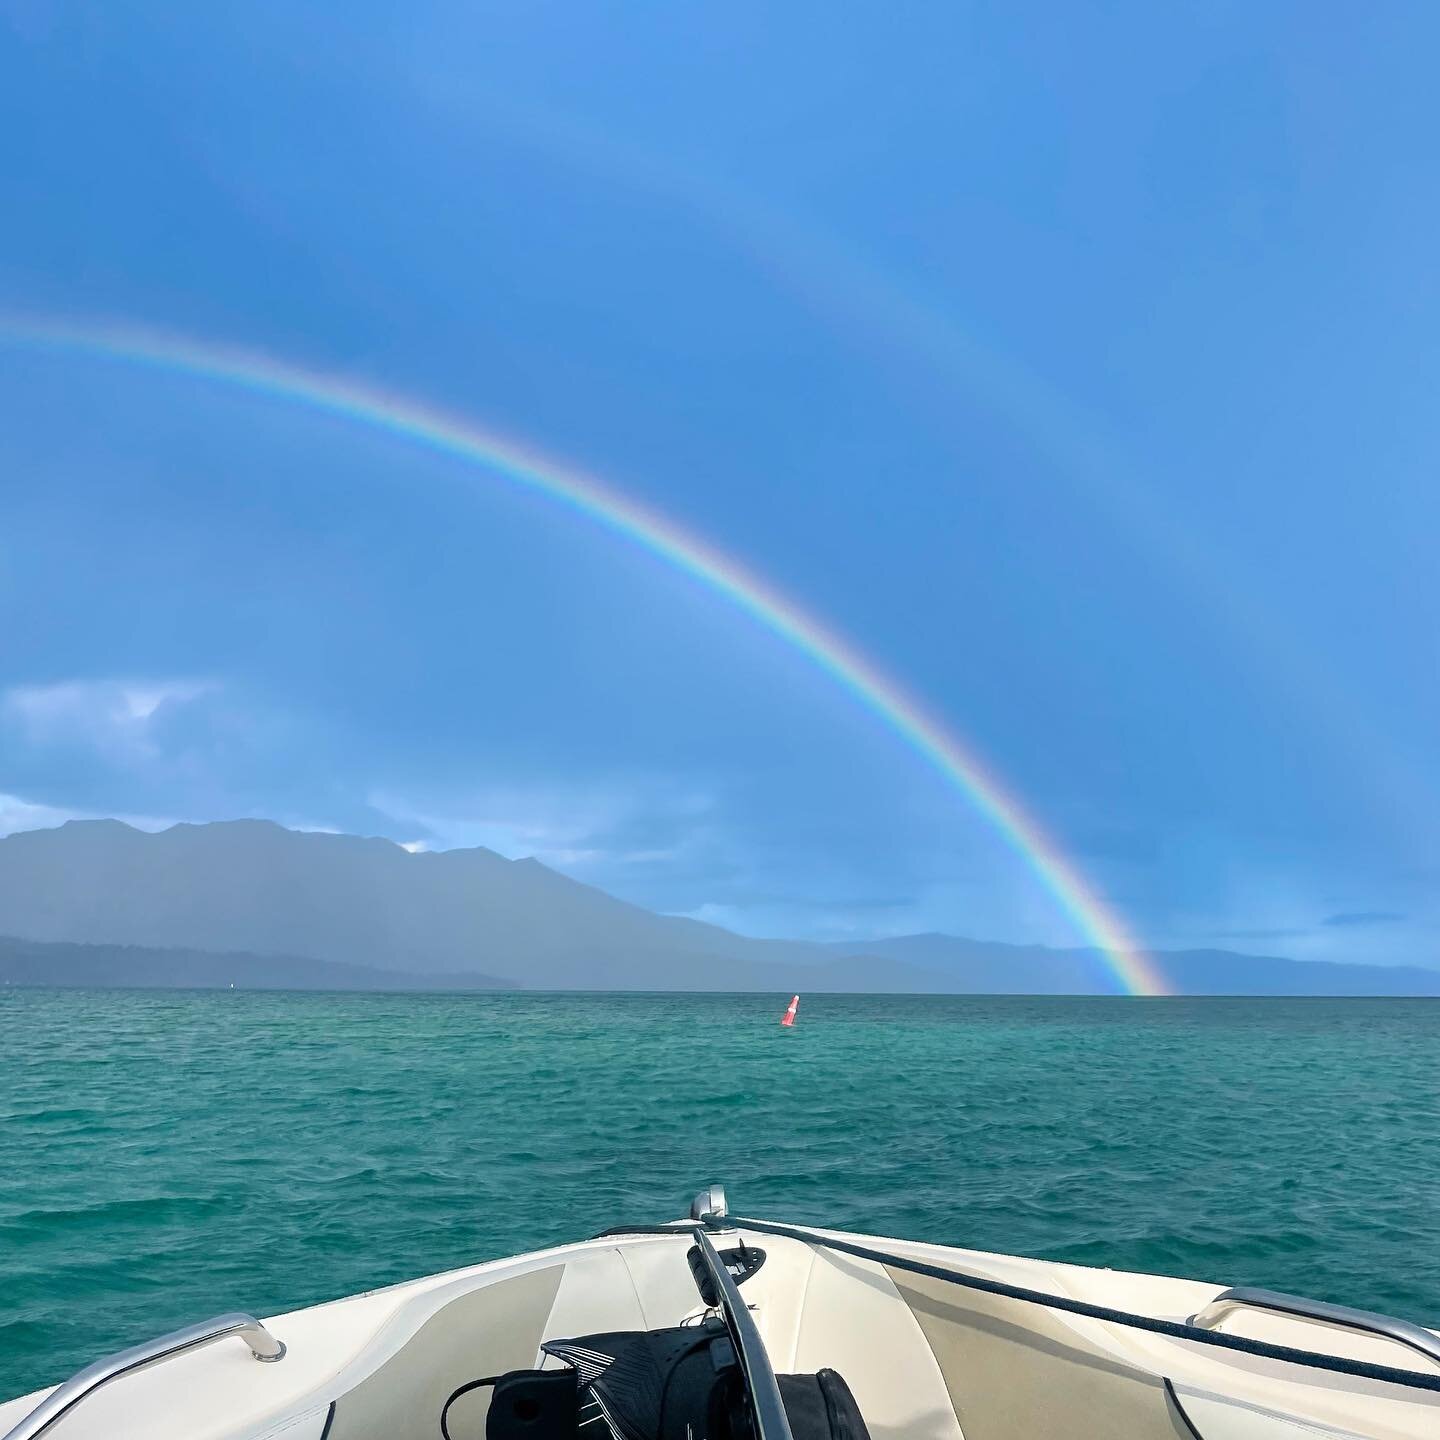 What a treat having a rainbow and a bit of rain to start our day! 🌈🌧

#Kjswatersports #rainbow